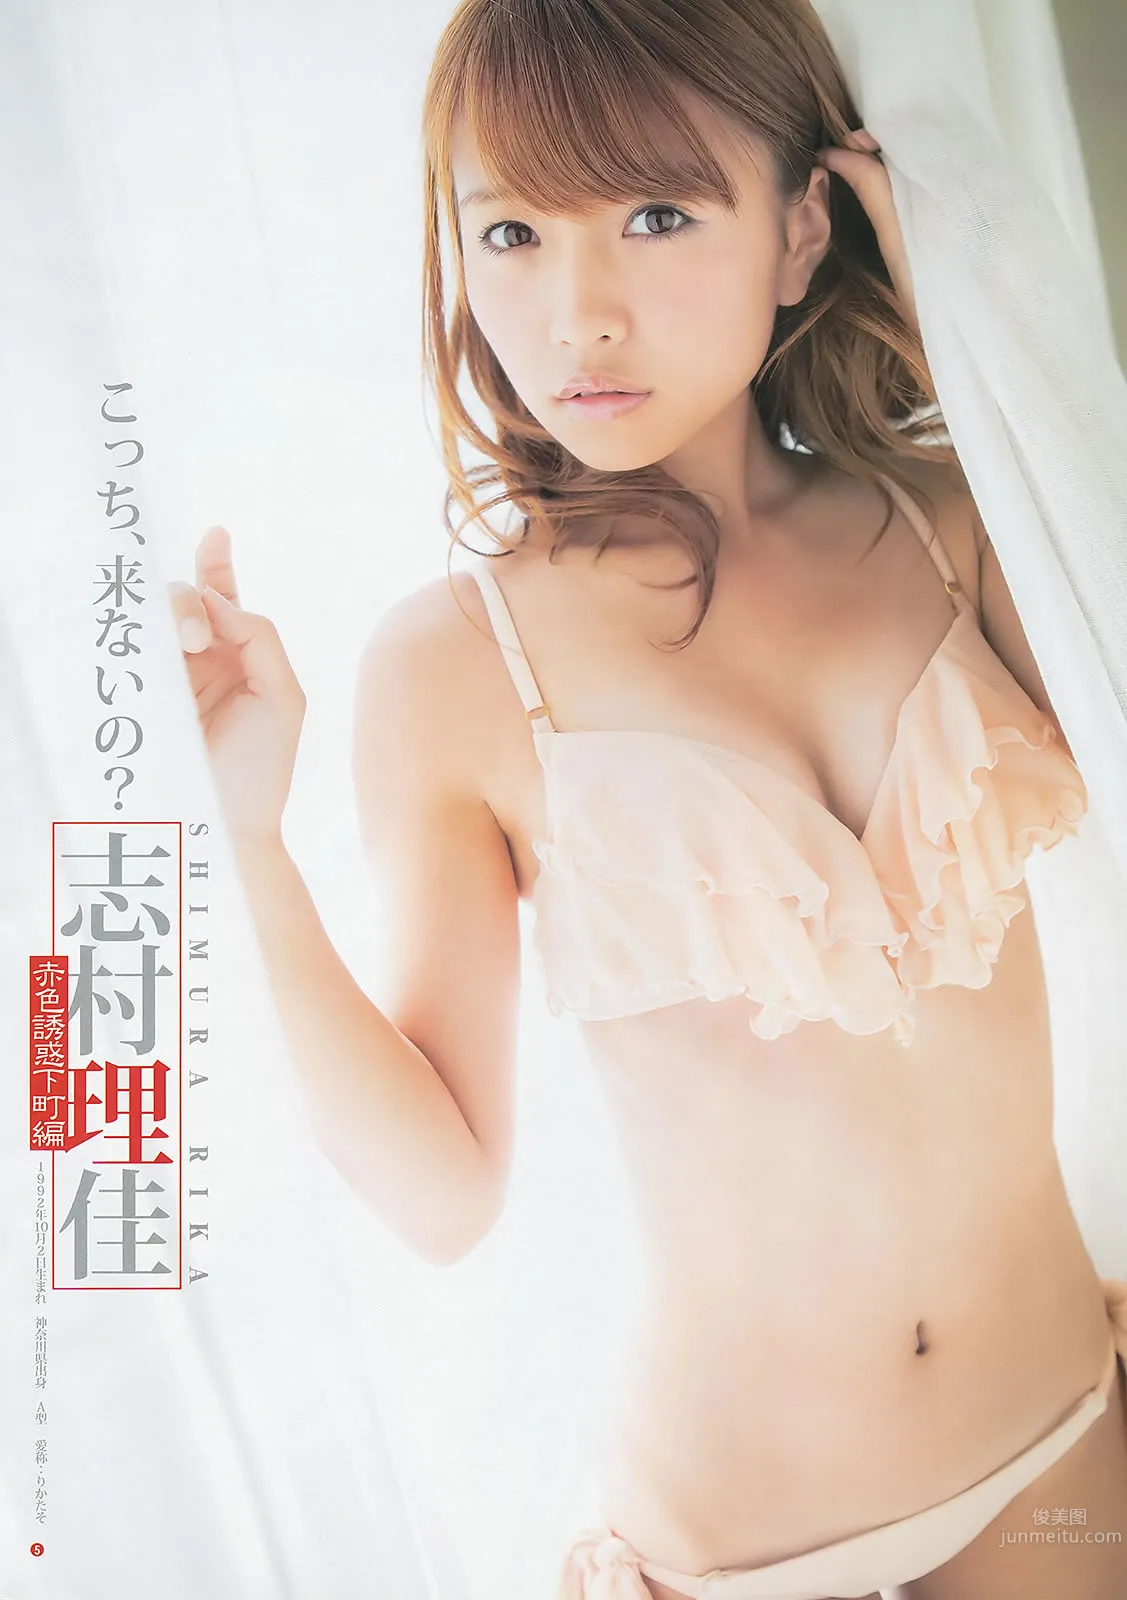 [Weekly Young Jump] 2012 No.45 46 SUPER☆GiRLS 佐々木もよこ 山本彩 松井咲子_13